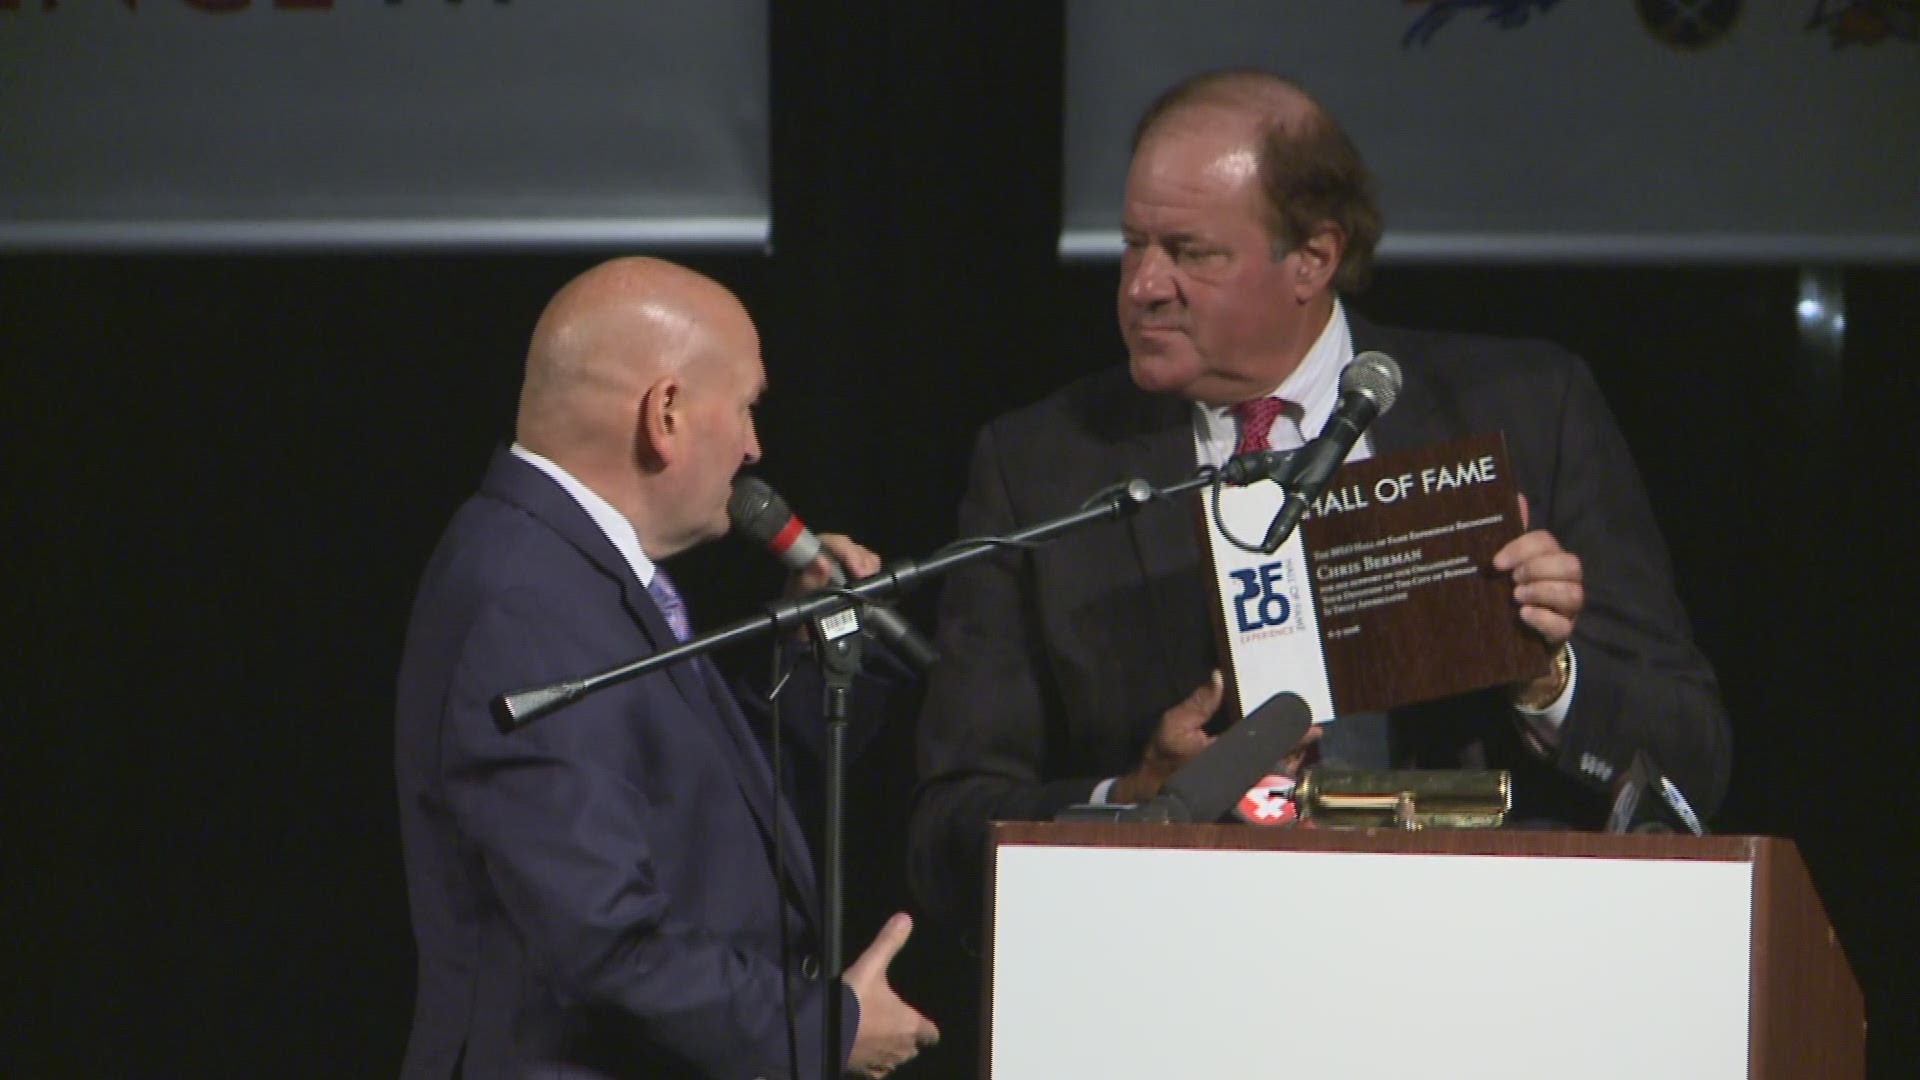 Chris Berman speaks at Buffalo Hall of Fame Experience Fundraiser